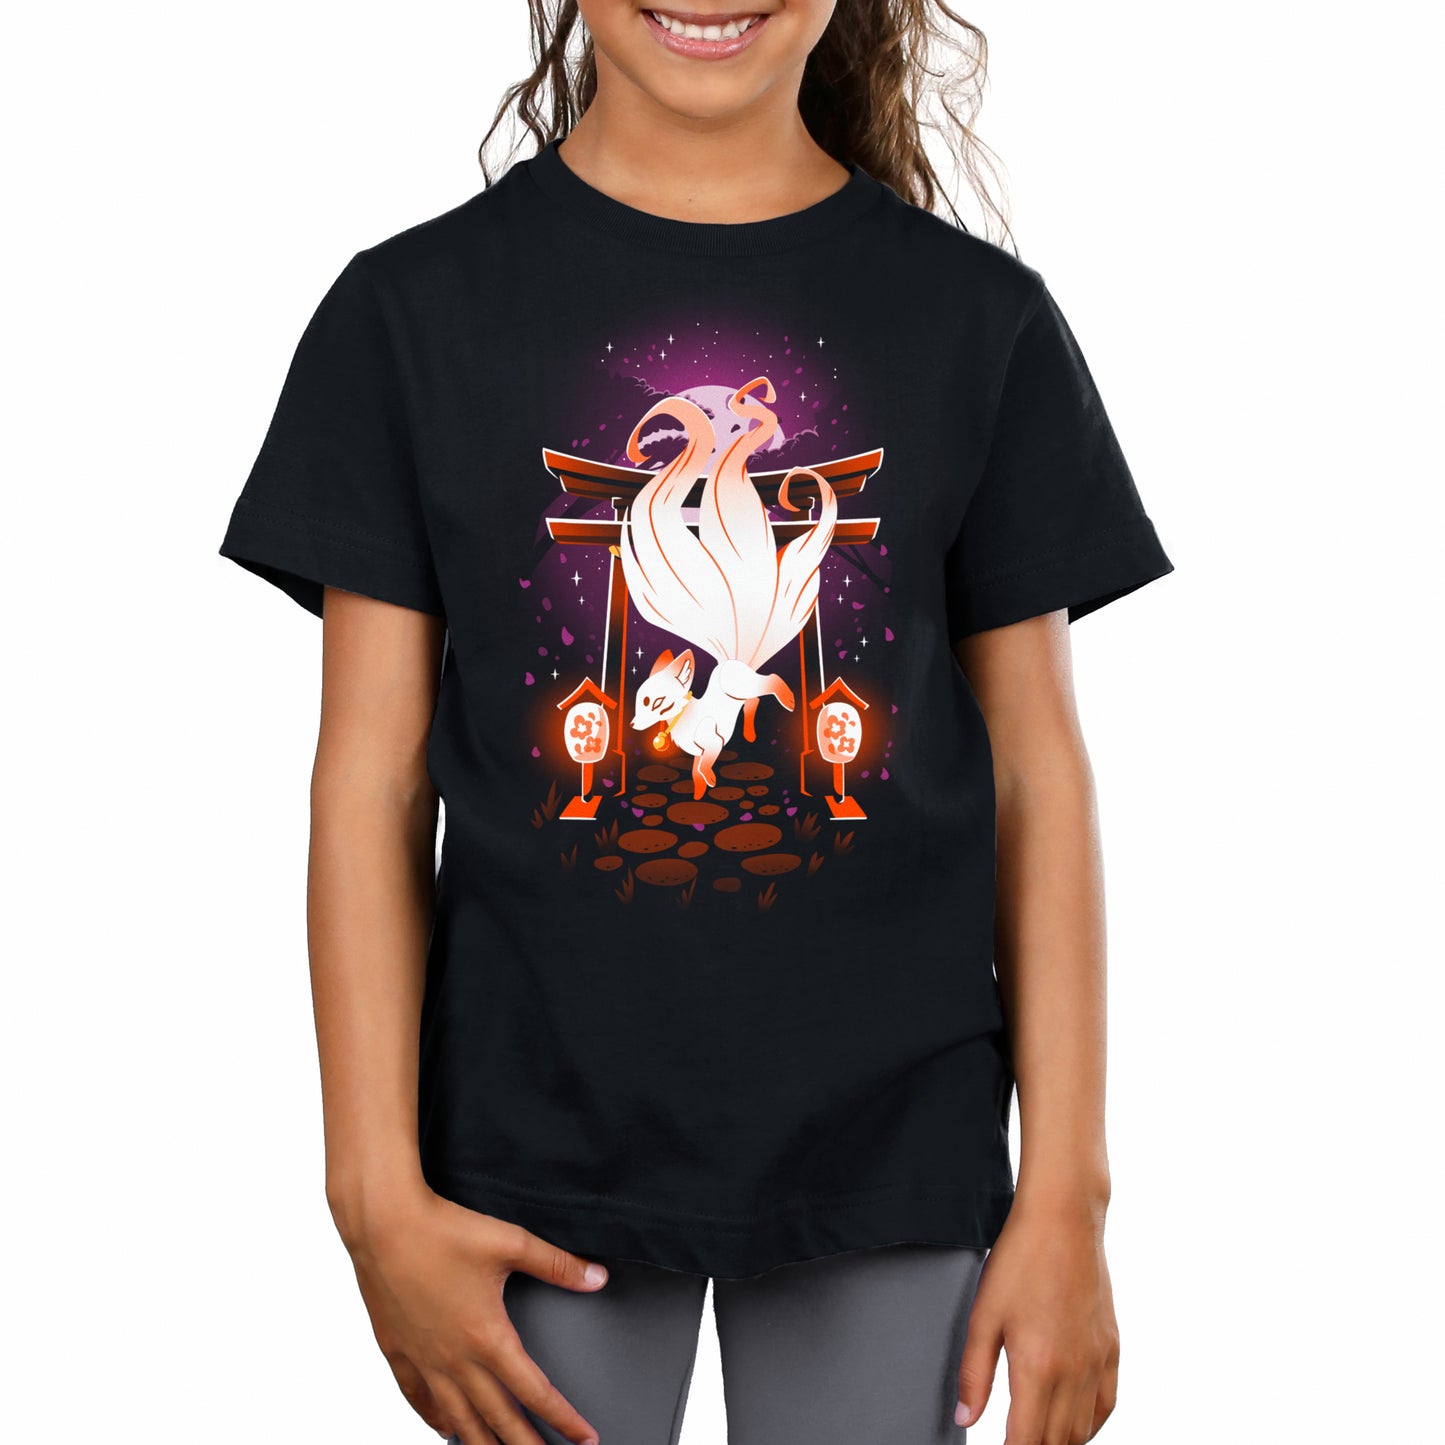 A girl wearing a black t-shirt with an image of a rooster inspired by the Enchanting Kitsune by TeeTurtle.